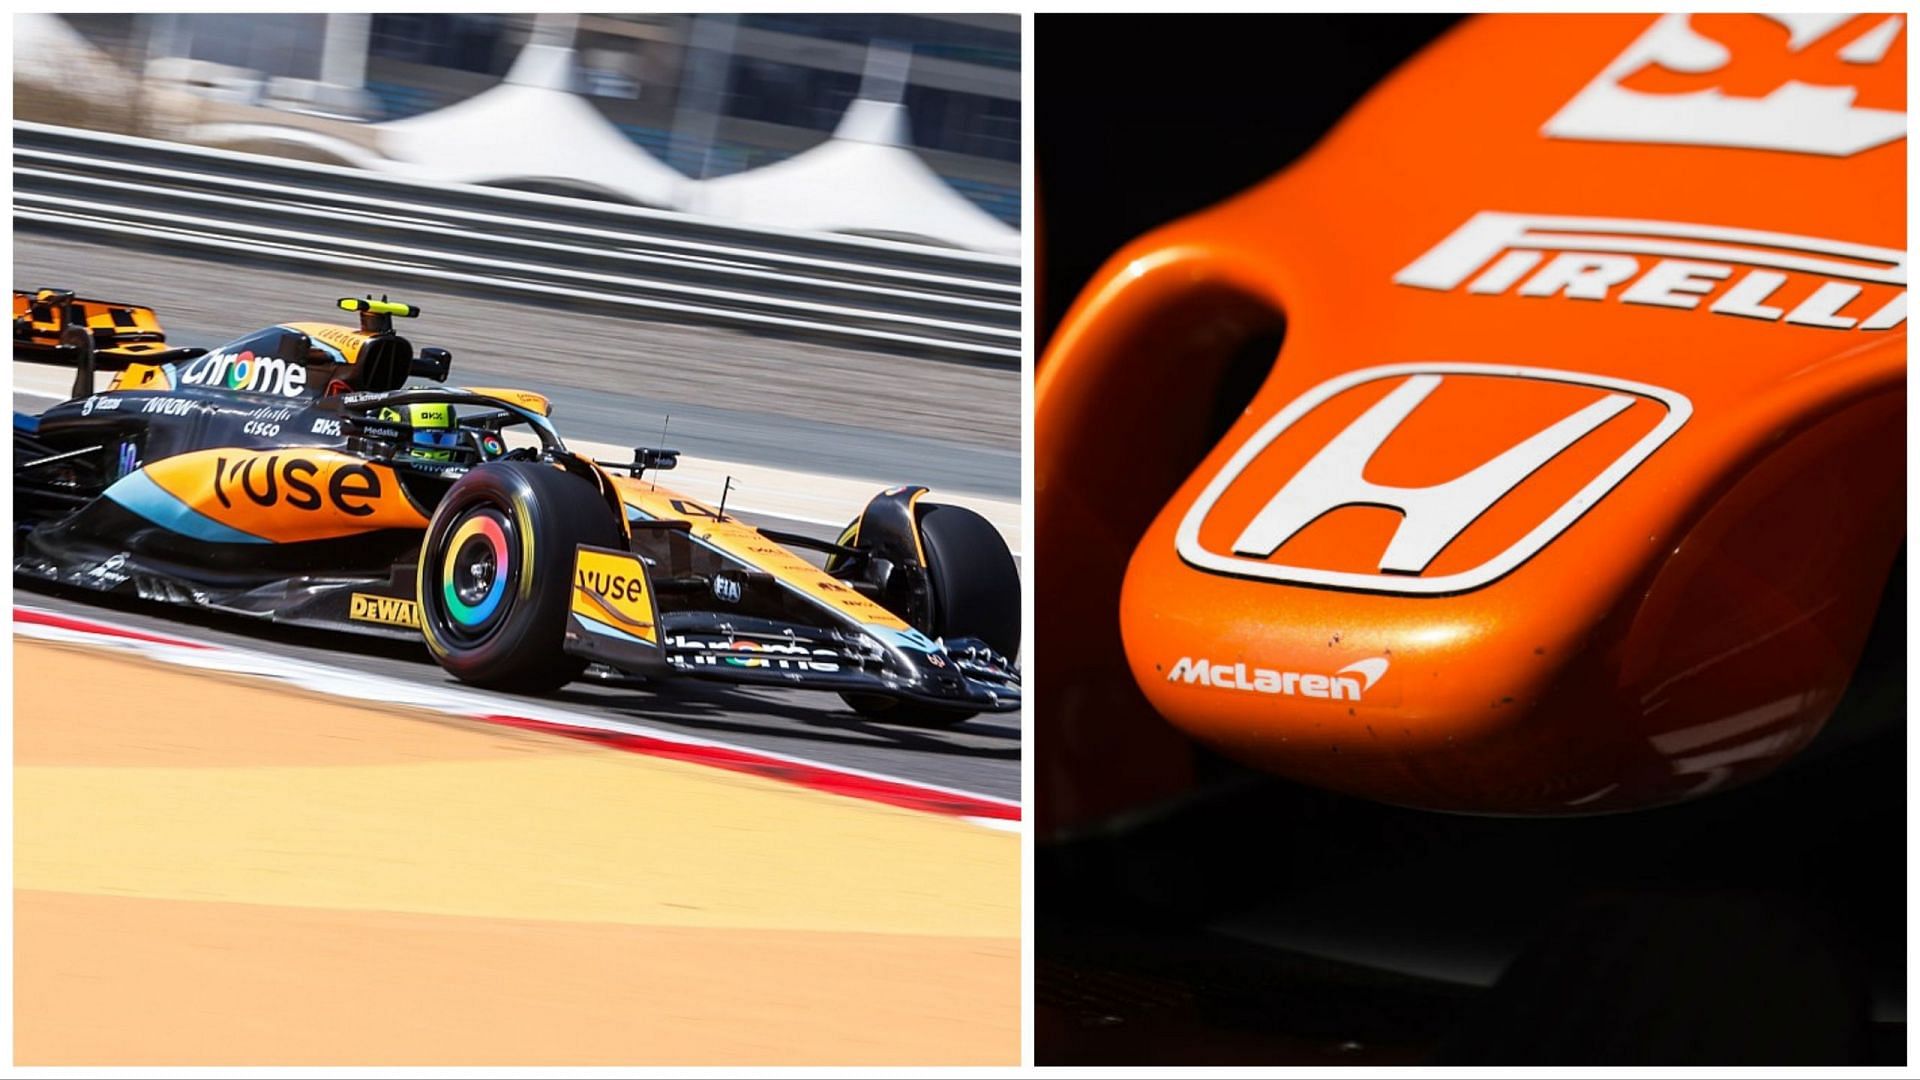 Former F1 team principal feels McLaren should not have separated with Honda